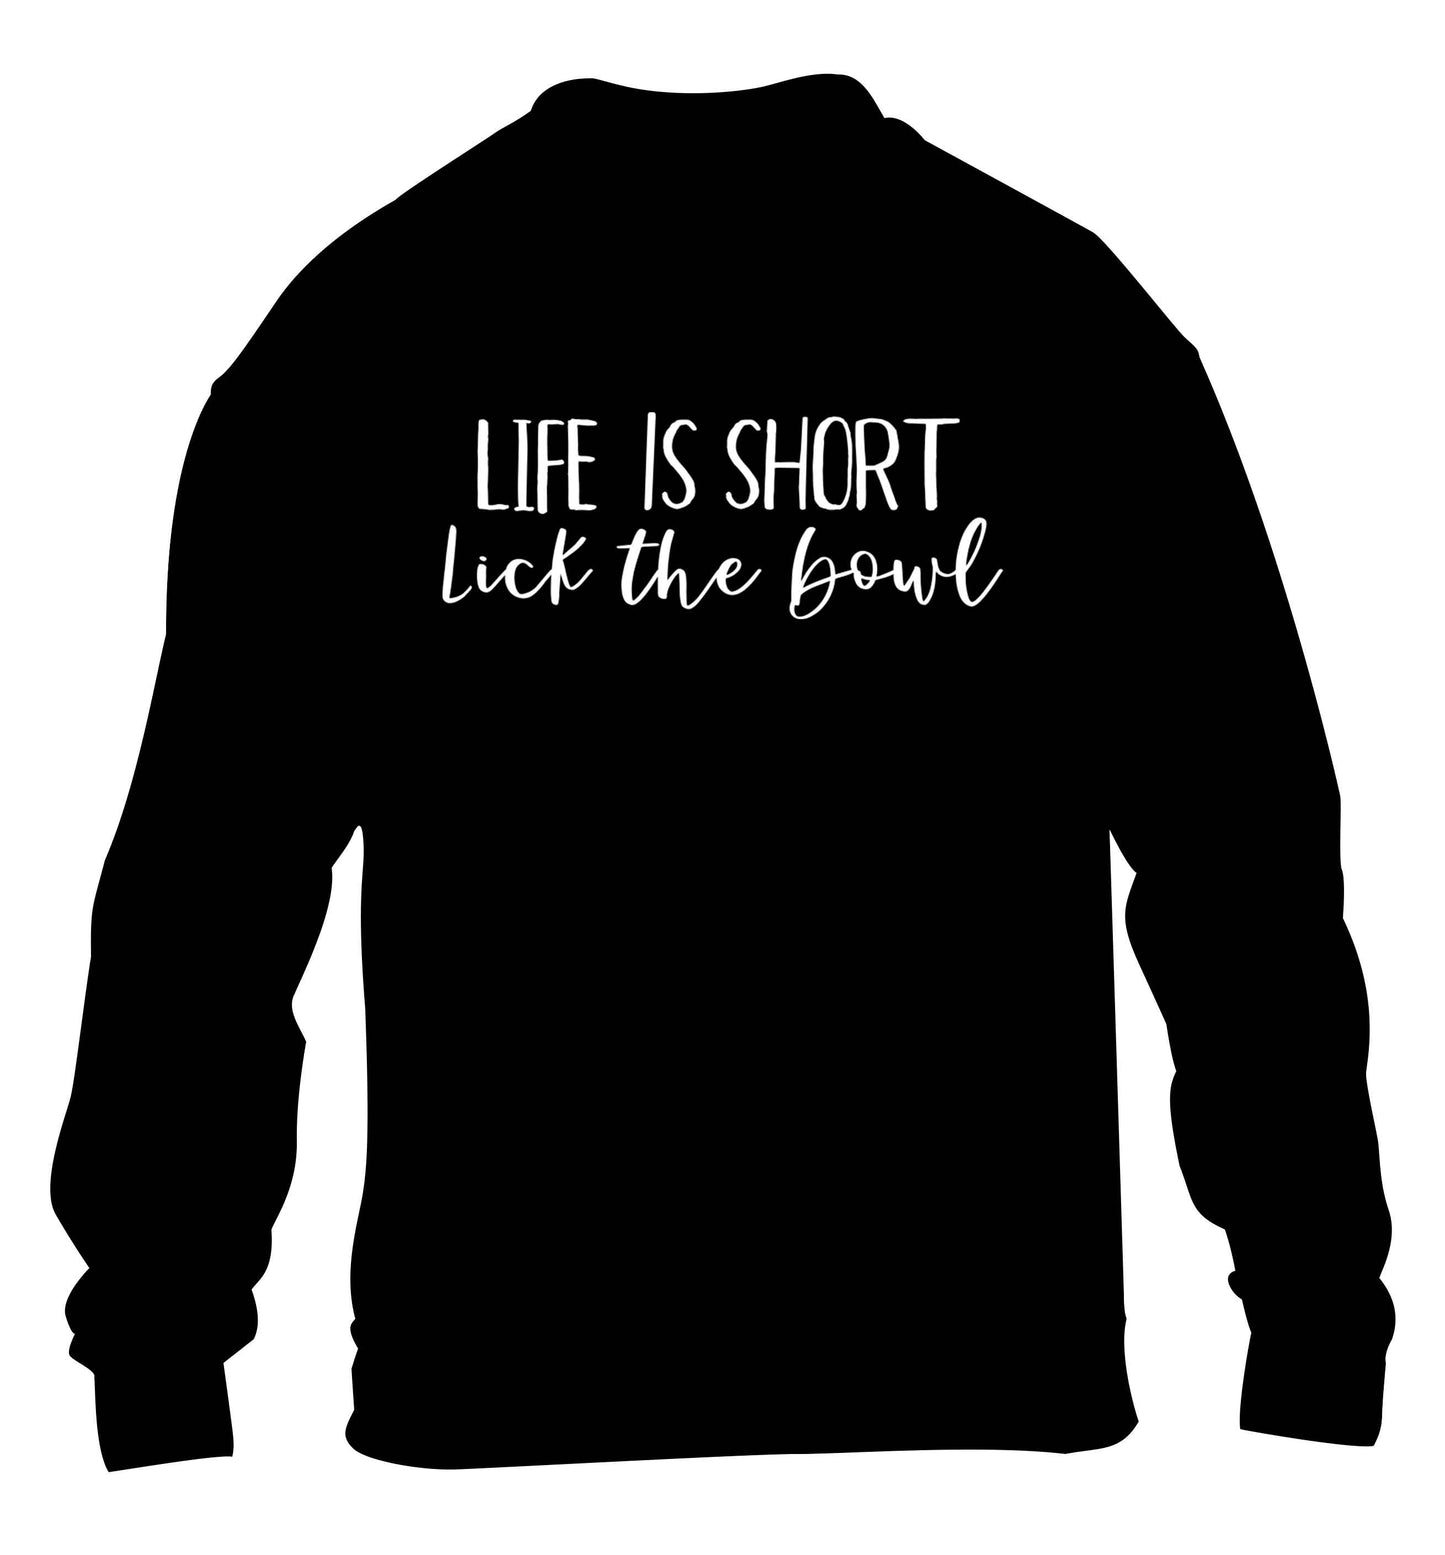 Life is short lick the bowl children's black sweater 12-13 Years